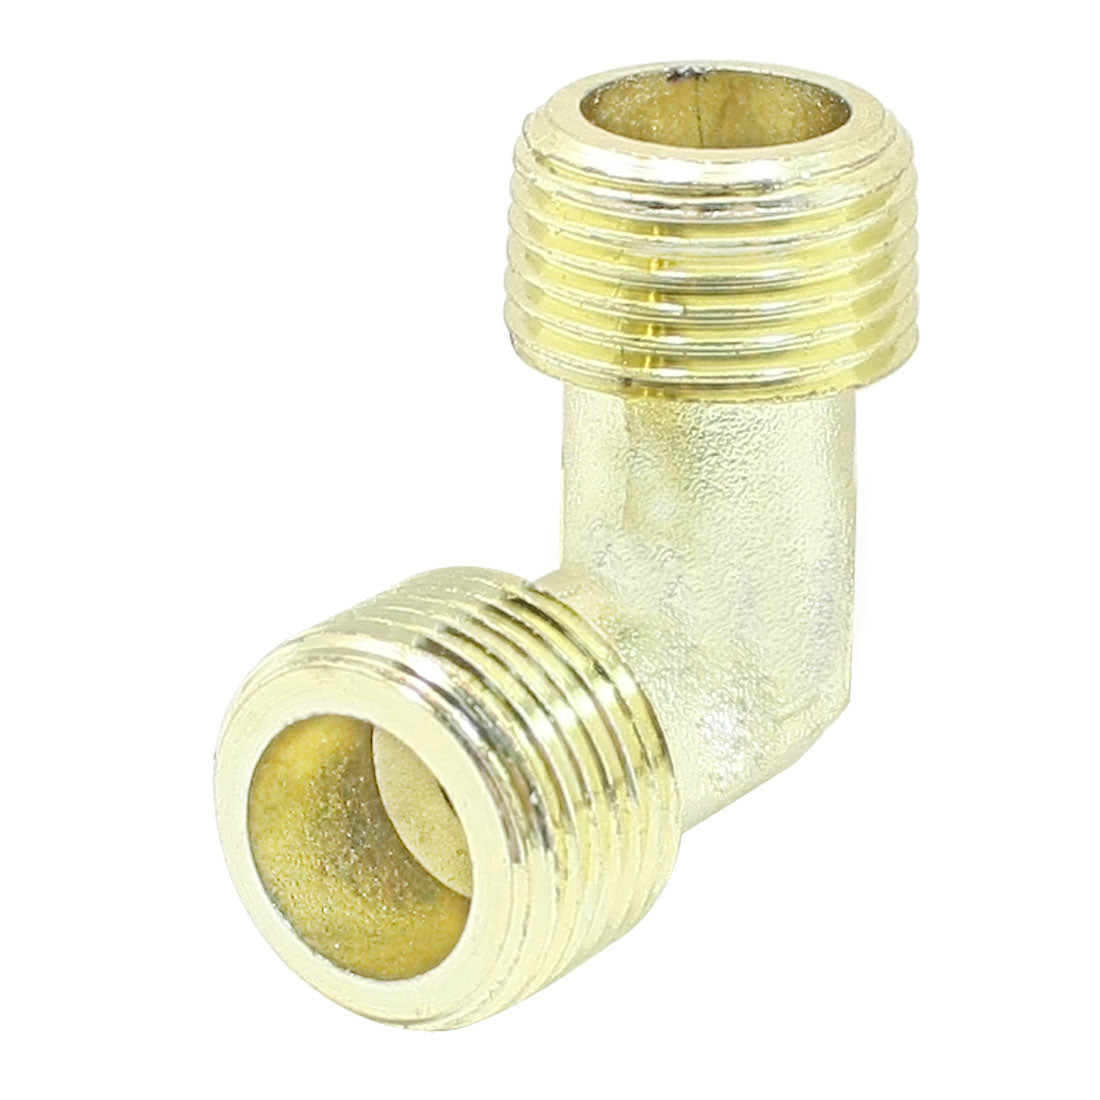 uxcell Uxcell Gold Tone 16.5mm Dia 90 Degree Male Elbow Connector for Air Compressor